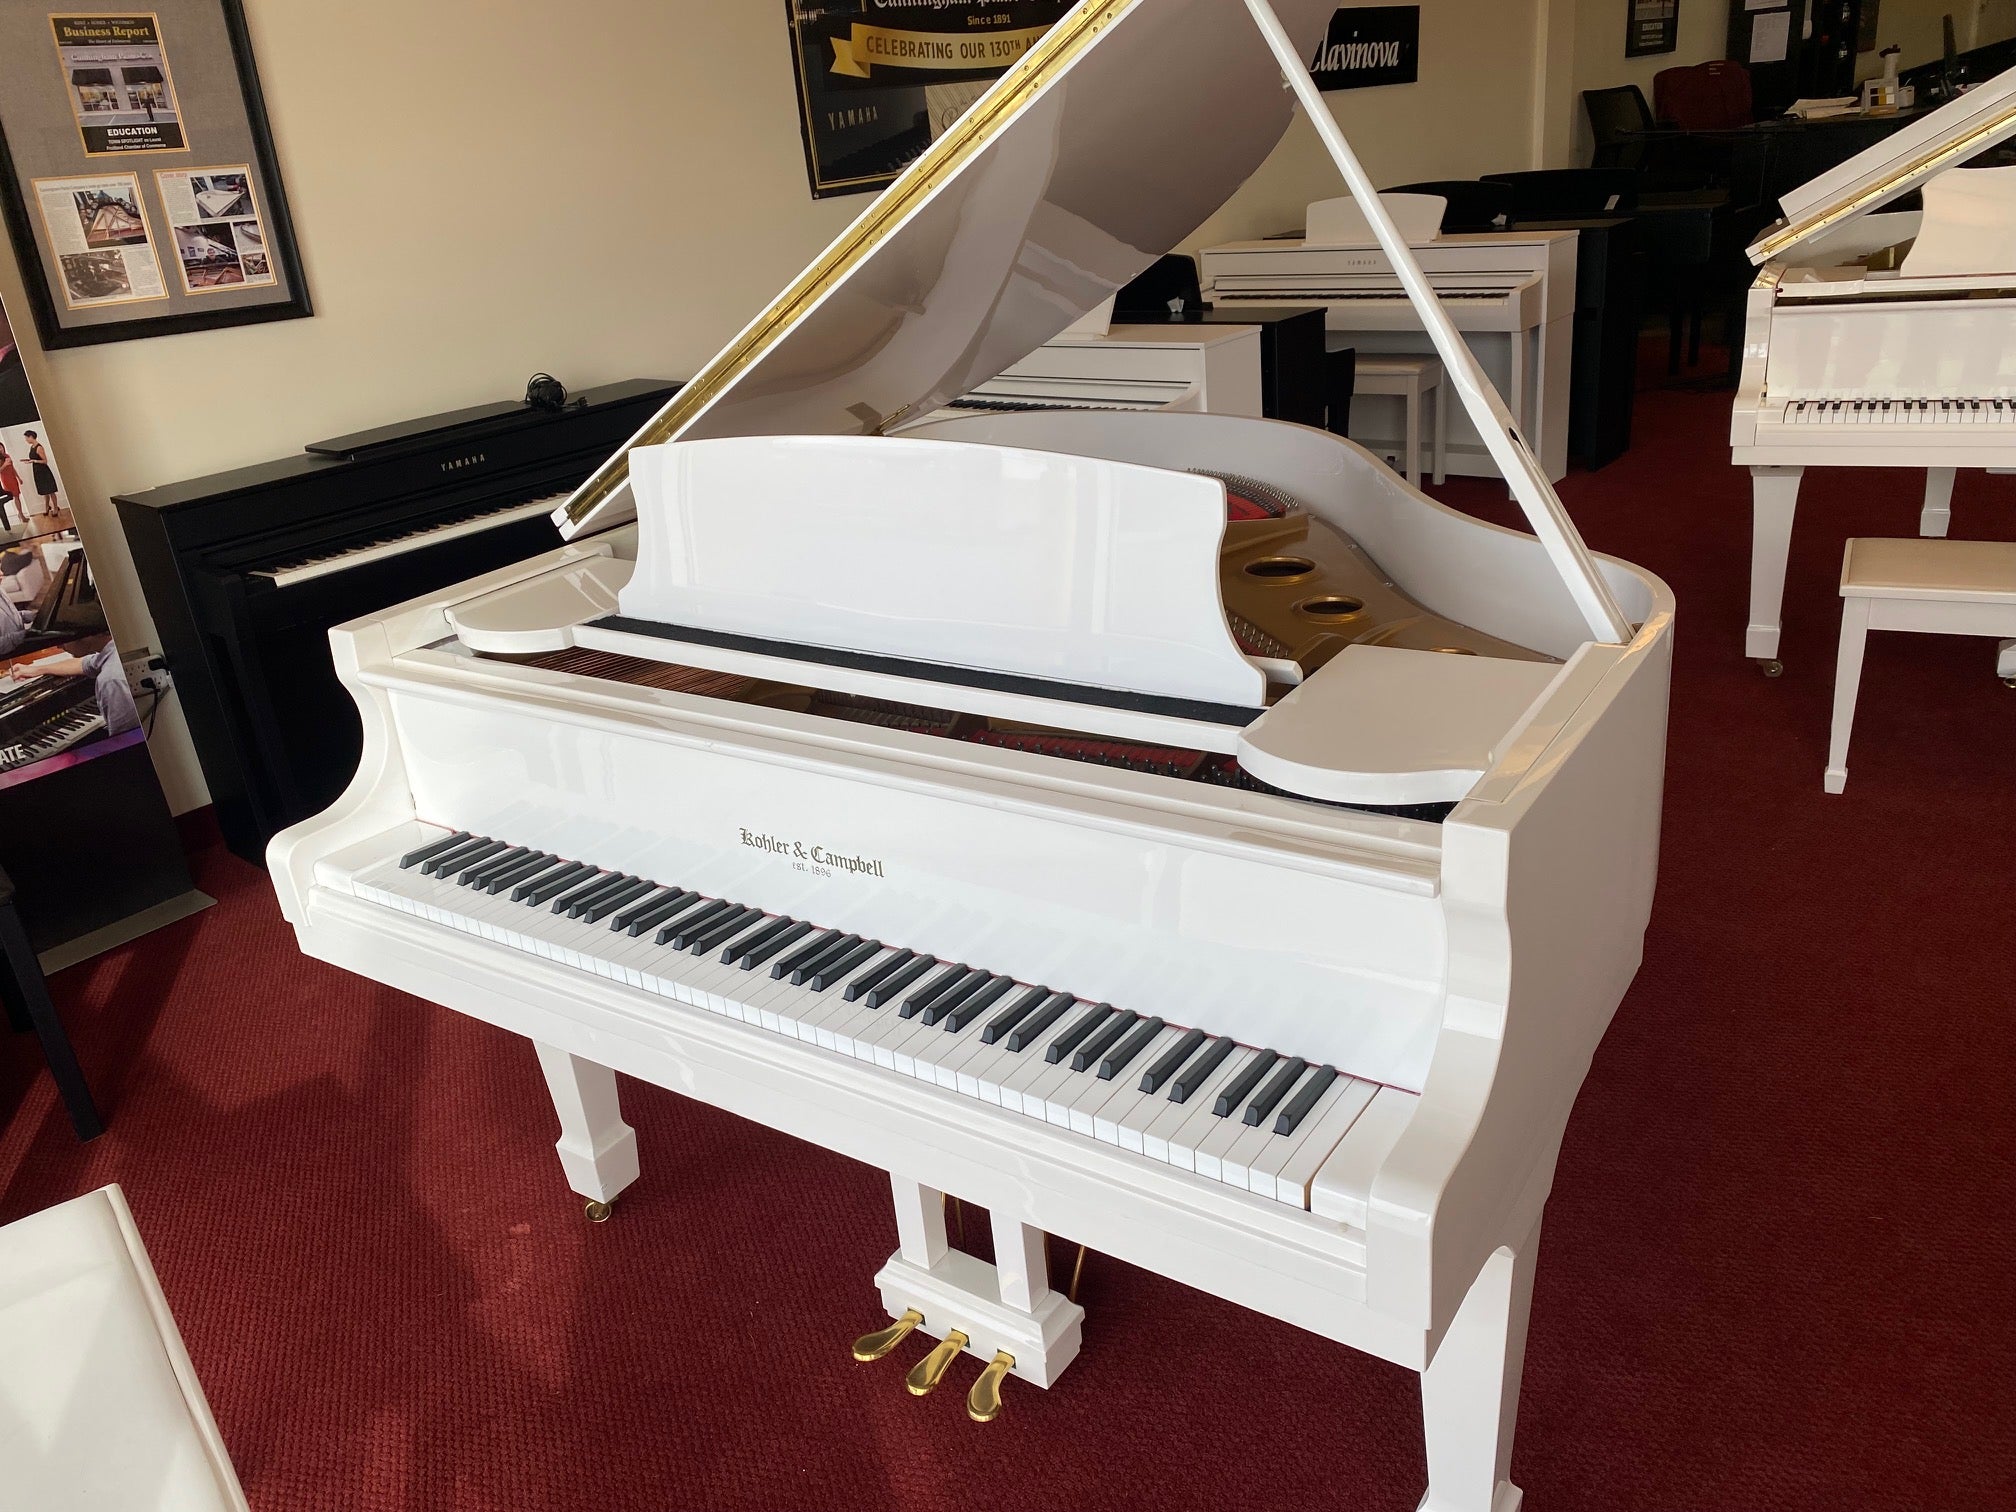 Kohler & Campbell SGK-500WH 5' Baby Grand Piano in Polished White Finish